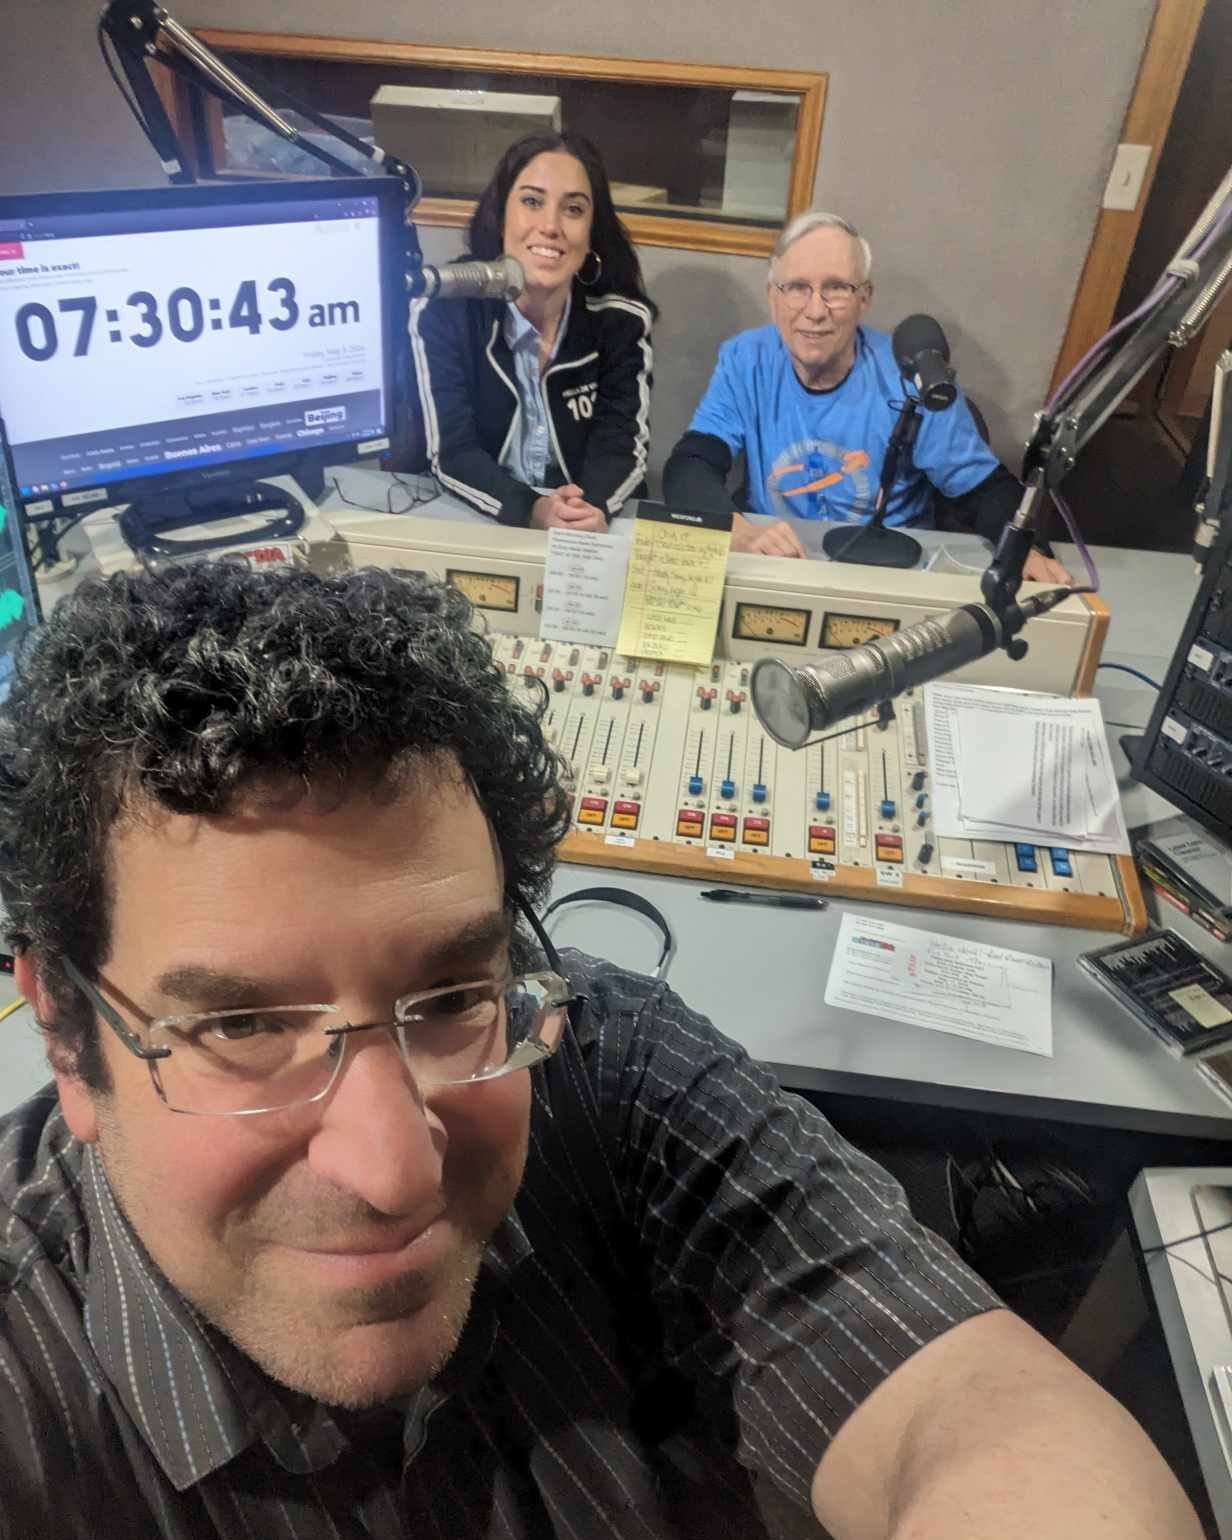 Thanks for having our very own Hella De Vil on the air this morning WRJN! We are so excited for everyone to join us at the Pancake Breakfast May 11th to support the Young Eagles with @eaachapter838racinewi .

Event Details: https://fb.me/e/4dIOuHVWe
